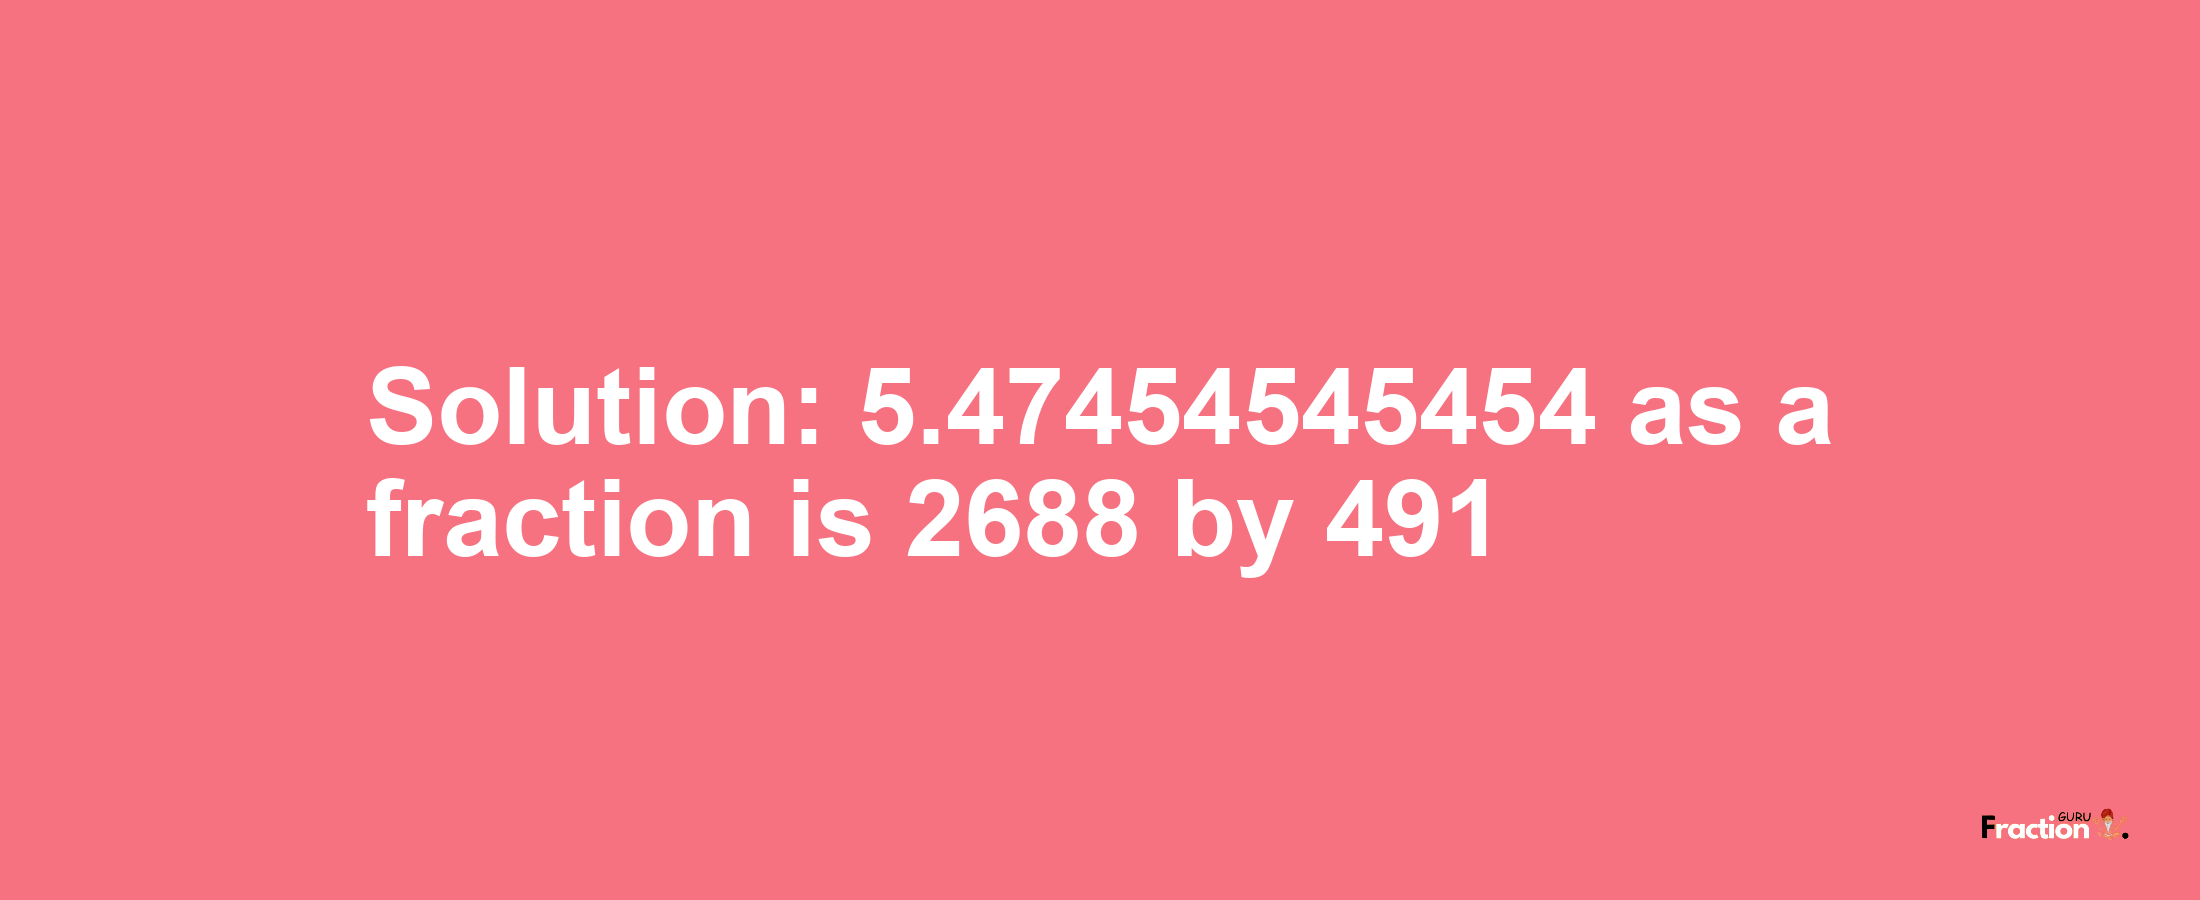 Solution:5.47454545454 as a fraction is 2688/491